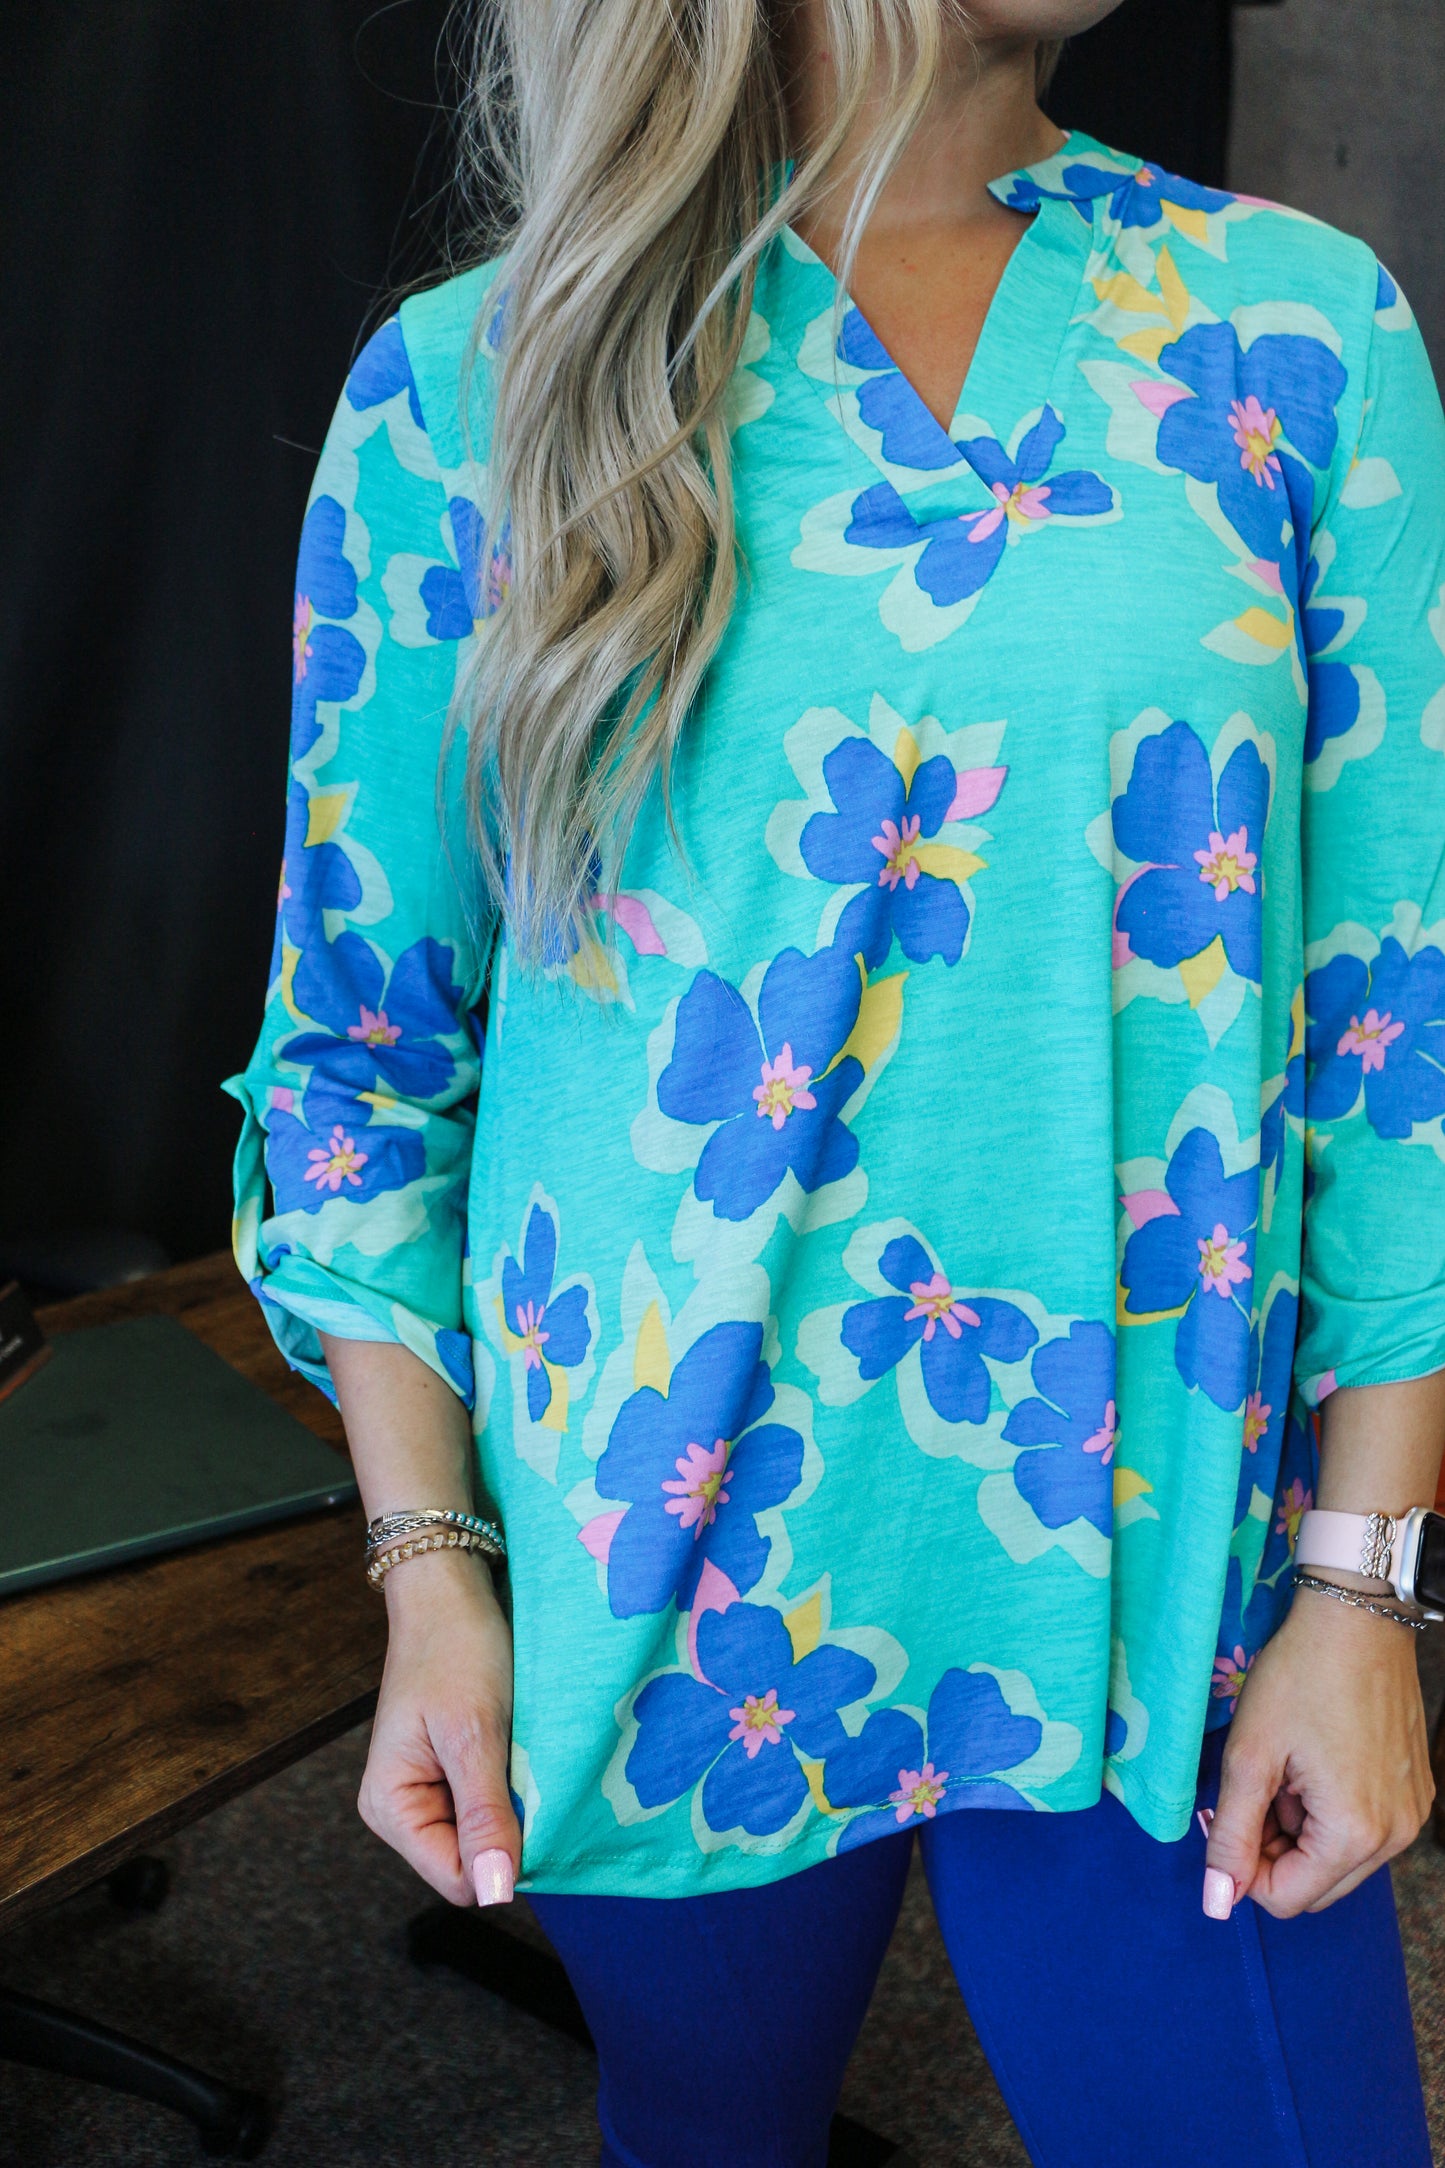 The Lizzy Emerald Floral Top